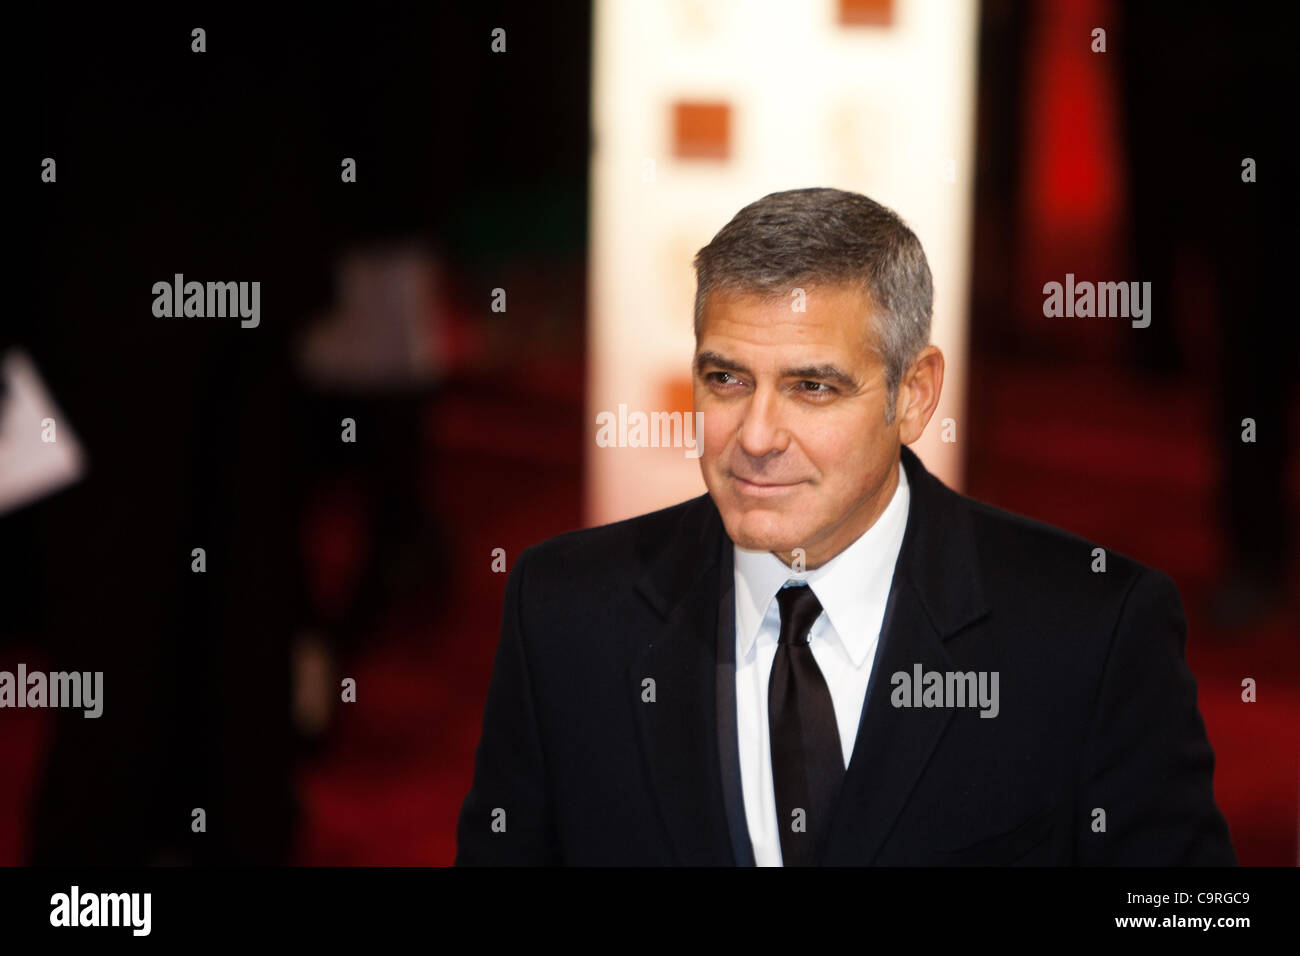 London, UK, 12/02/2012. Actor, Goerge Clooney, arriving on the red carpet to attend the 2012 BAFTAs Stock Photo